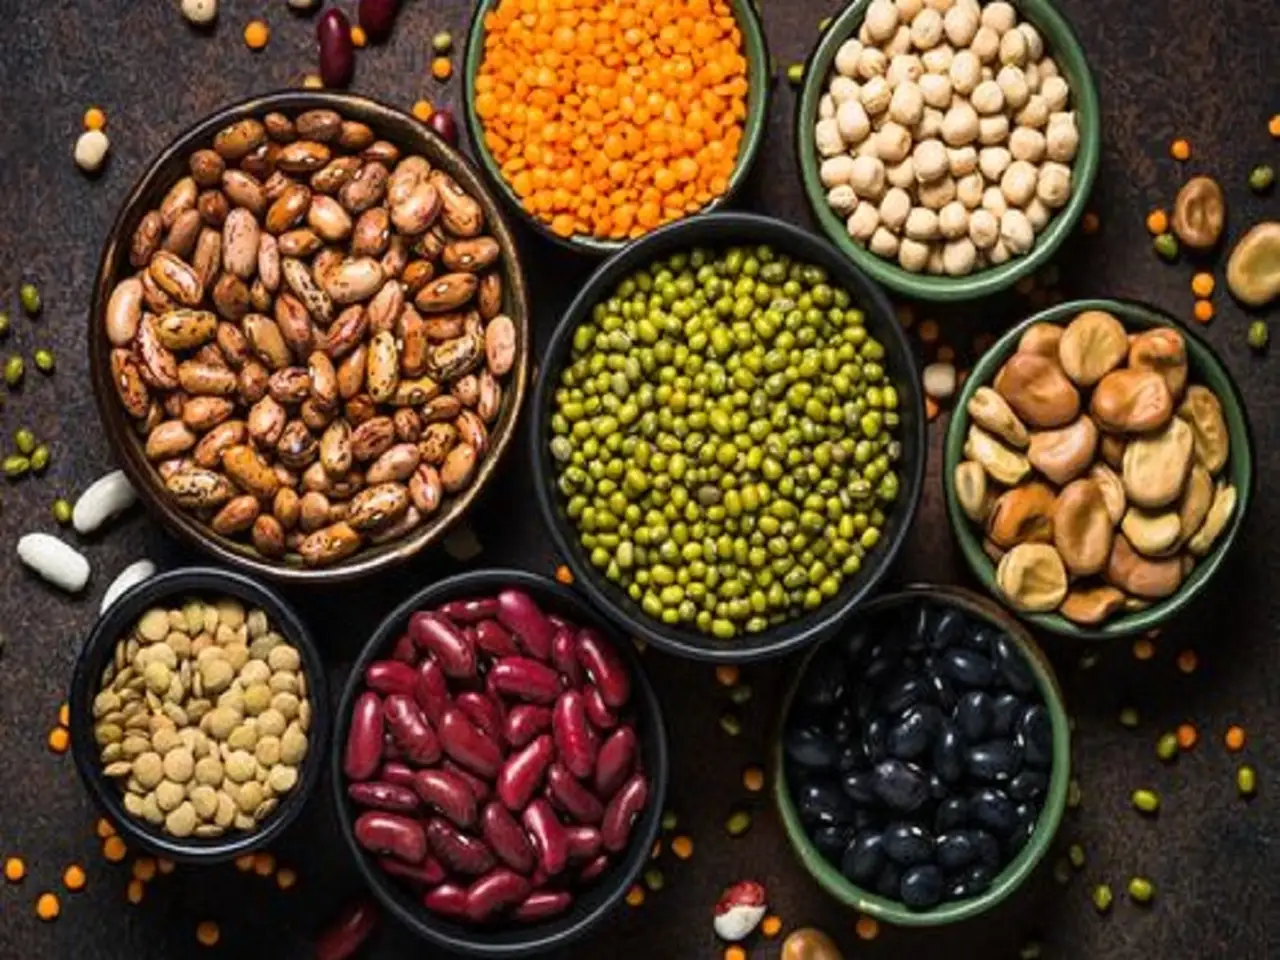 Beans and legumes are commonly available in our kitchen and are super good